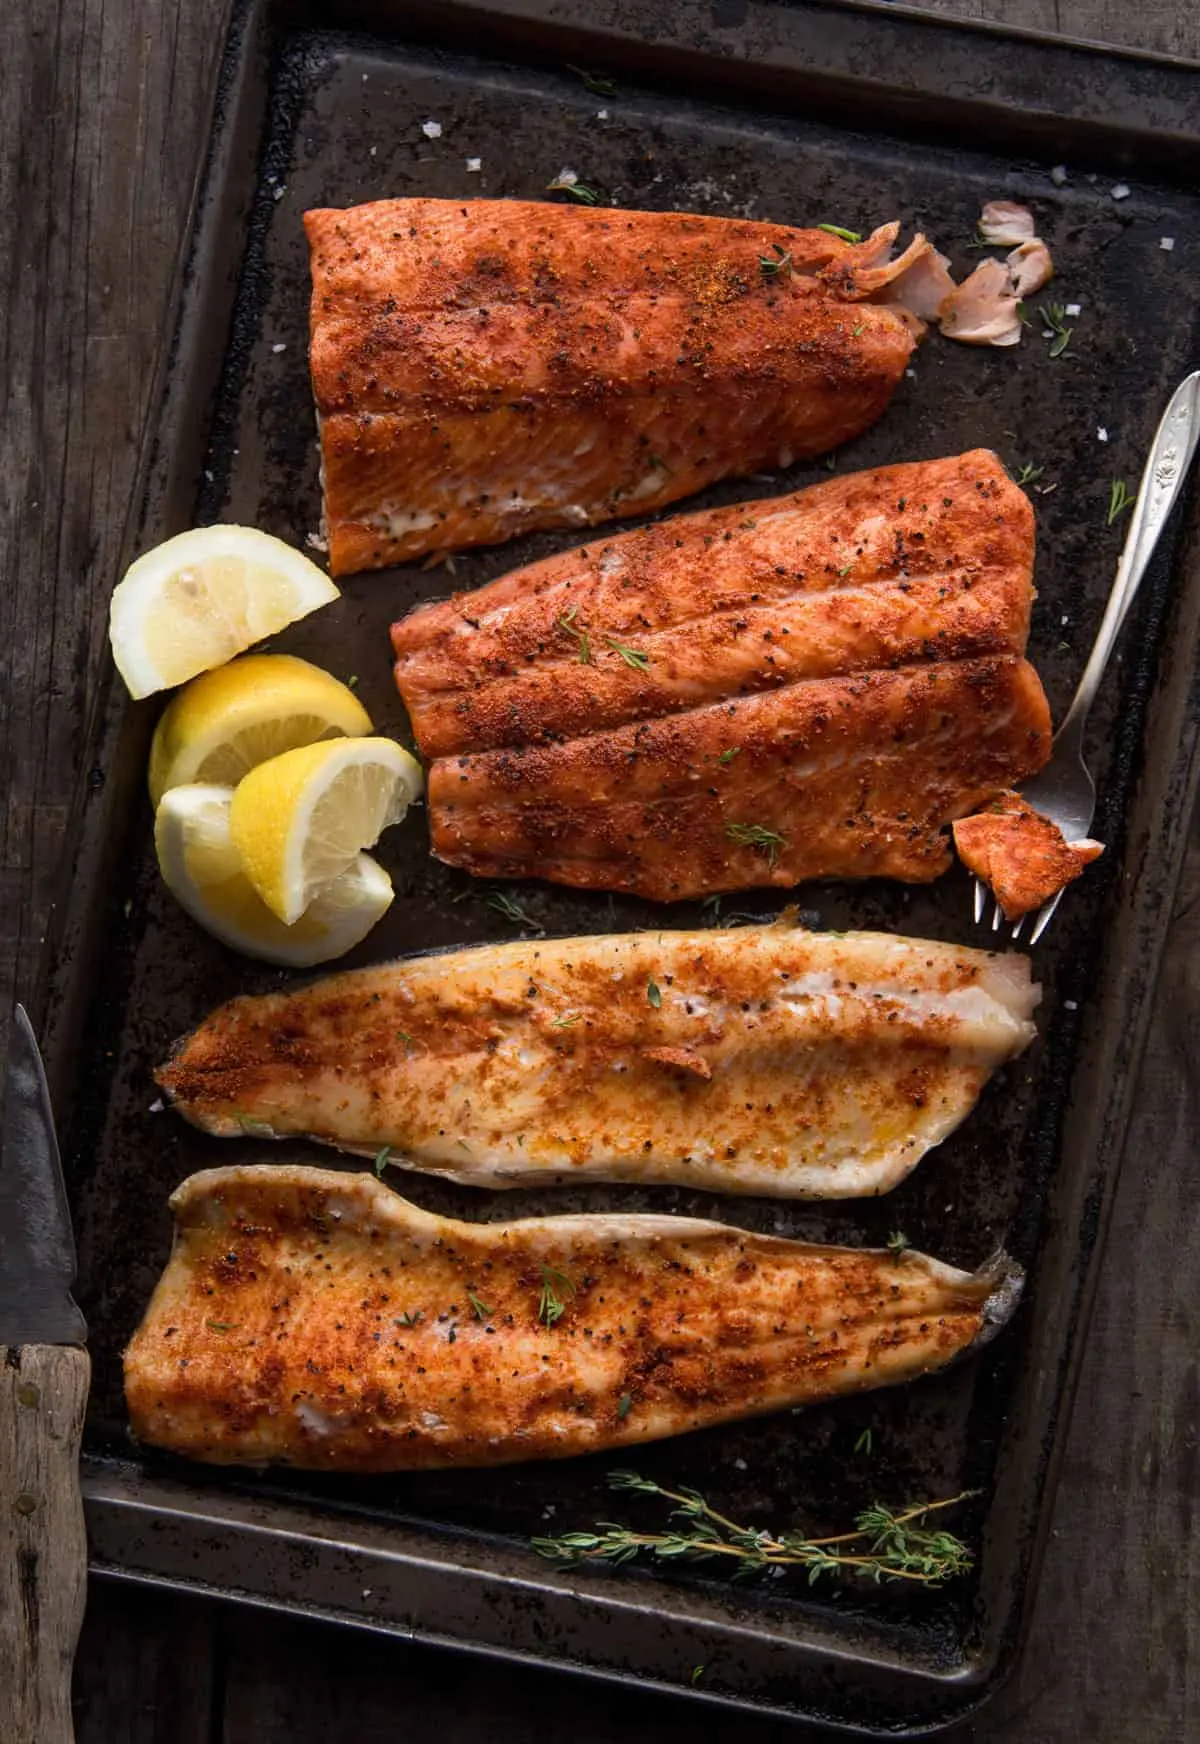 smoked trout taste - What tastes better trout or salmon